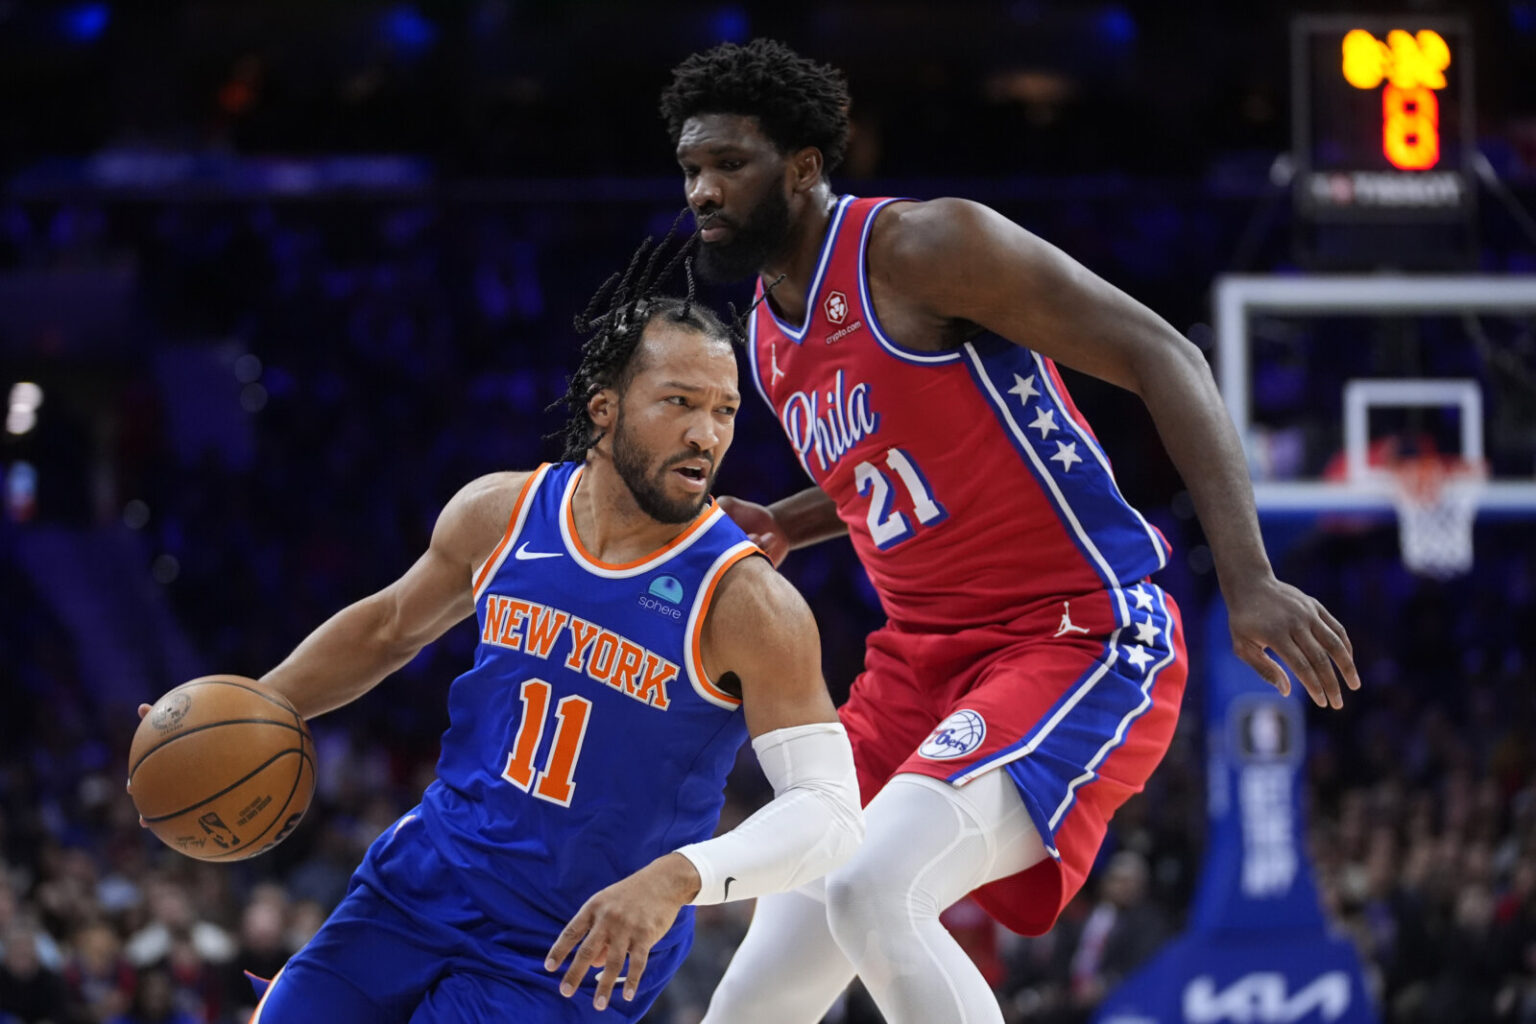 Philadelphia 76ers look to steal Game 1 of their first-round playoff series against the New York Knicks